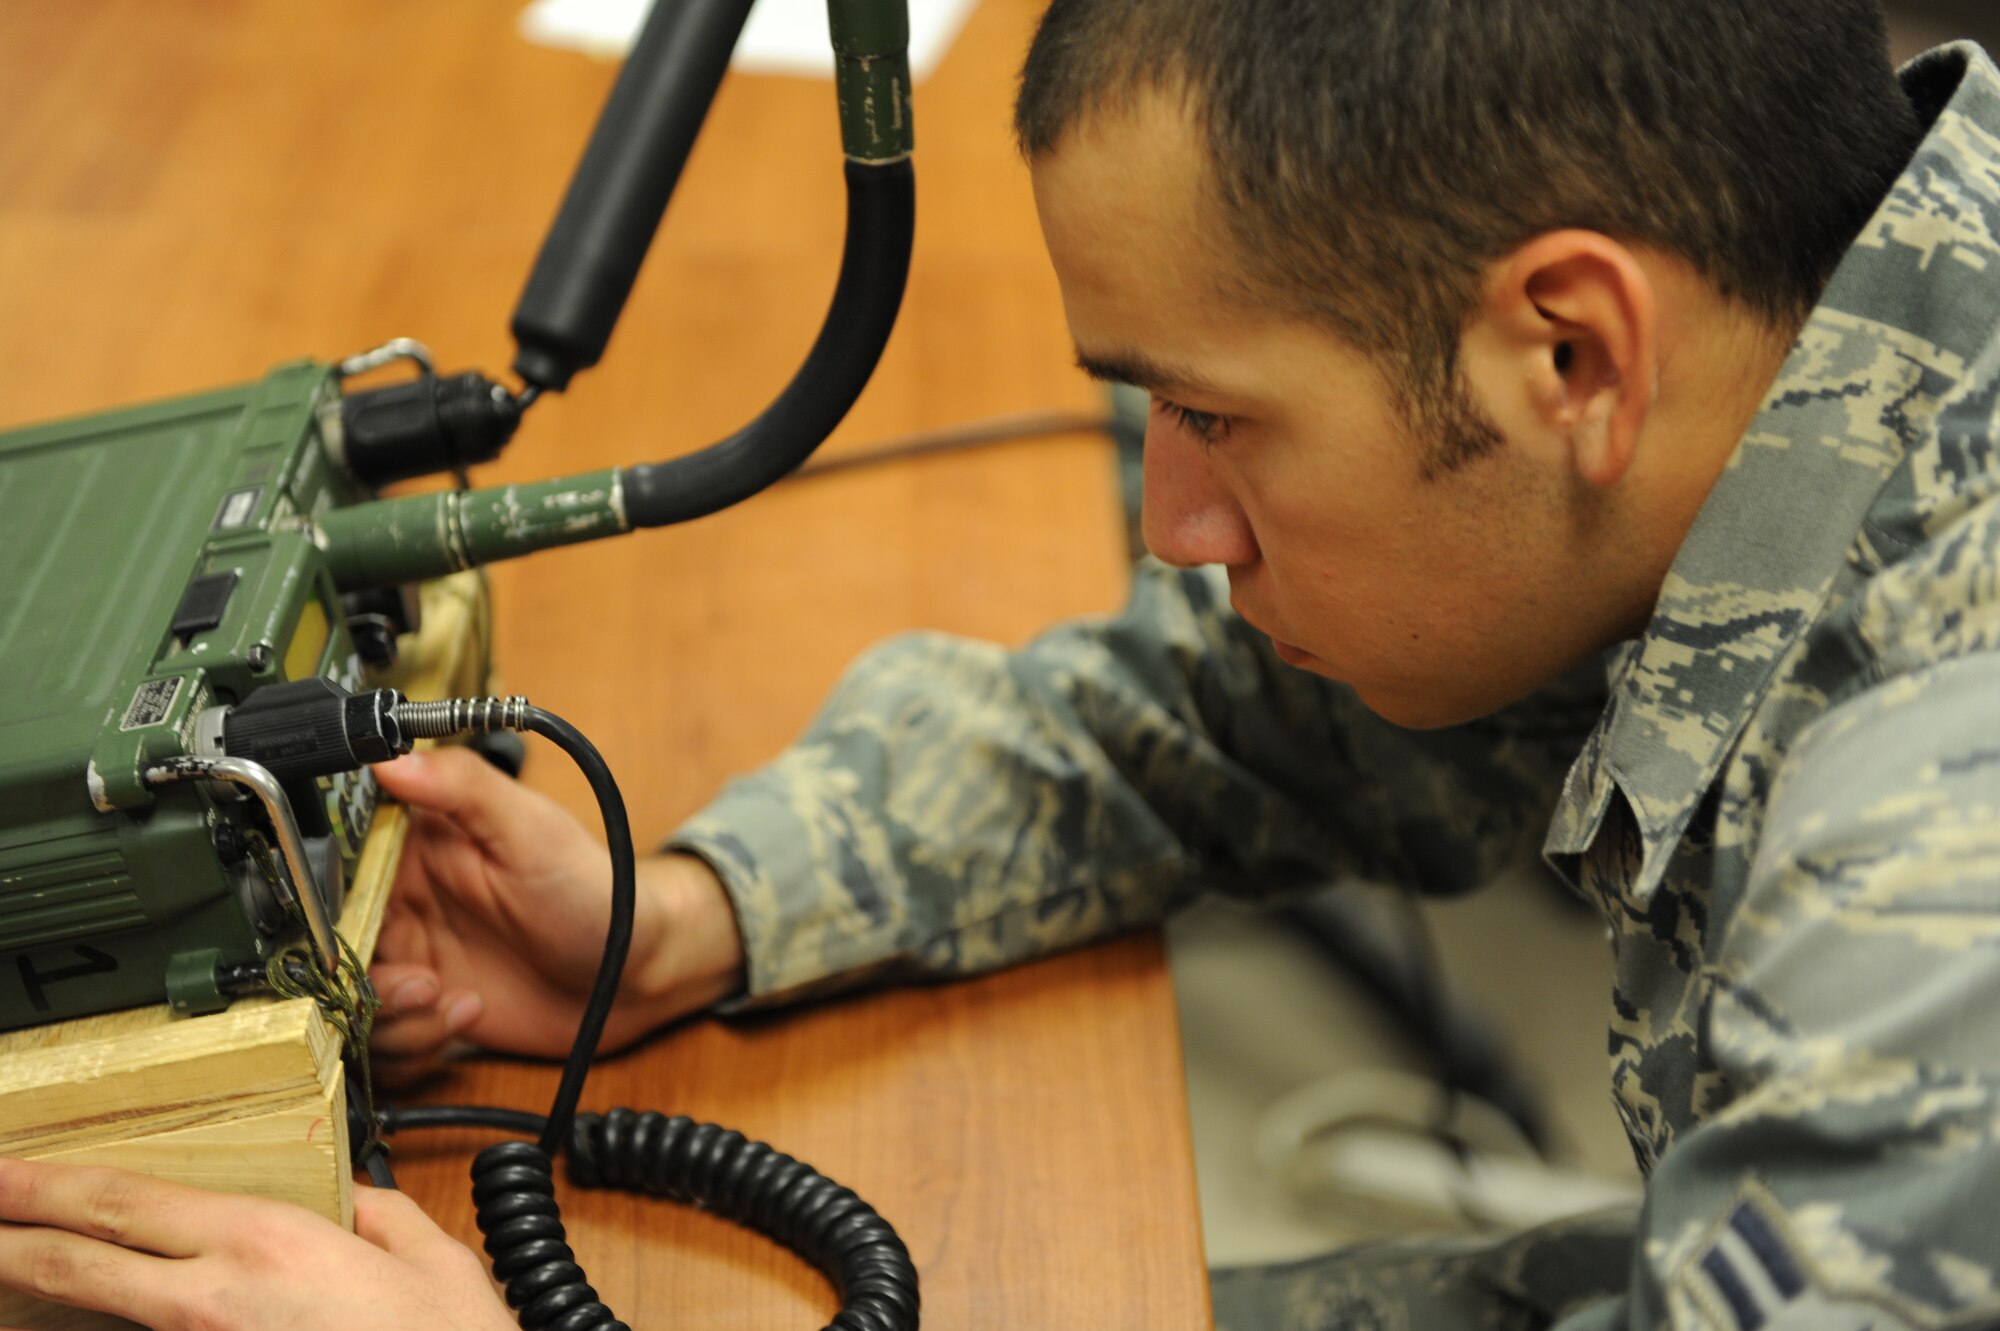 U.S. Air Force Airman 1st Class Alan Cisneros, a member of Tactical Air Control Party class Falcon 86, assembles and trouble shoots a radio during a progress check at the TACP school house, Hurlburt Field, Fla., Jan. 26, 2011. The TACP tactical training school involves rigorous academic and physical training standards. (U.S. Air Force photo by Airman 1st Class Caitlin O’Neil-McKeown/RELEASED) 





